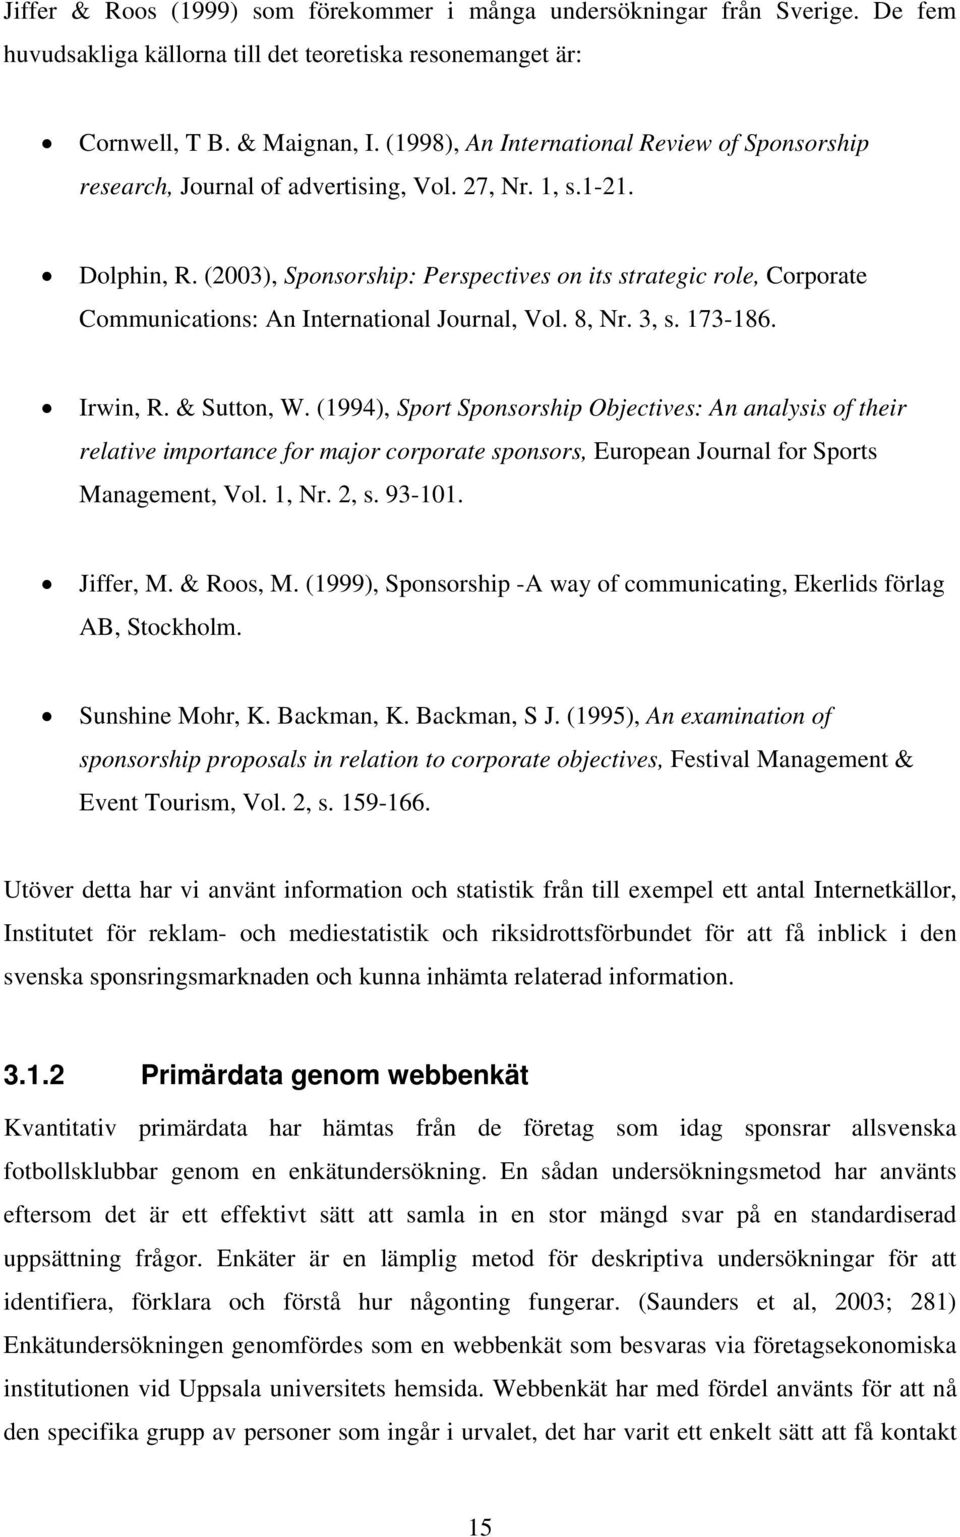 (2003), Sponsorship: Perspectives on its strategic role, Corporate Communications: An International Journal, Vol. 8, Nr. 3, s. 173-186. Irwin, R. & Sutton, W.